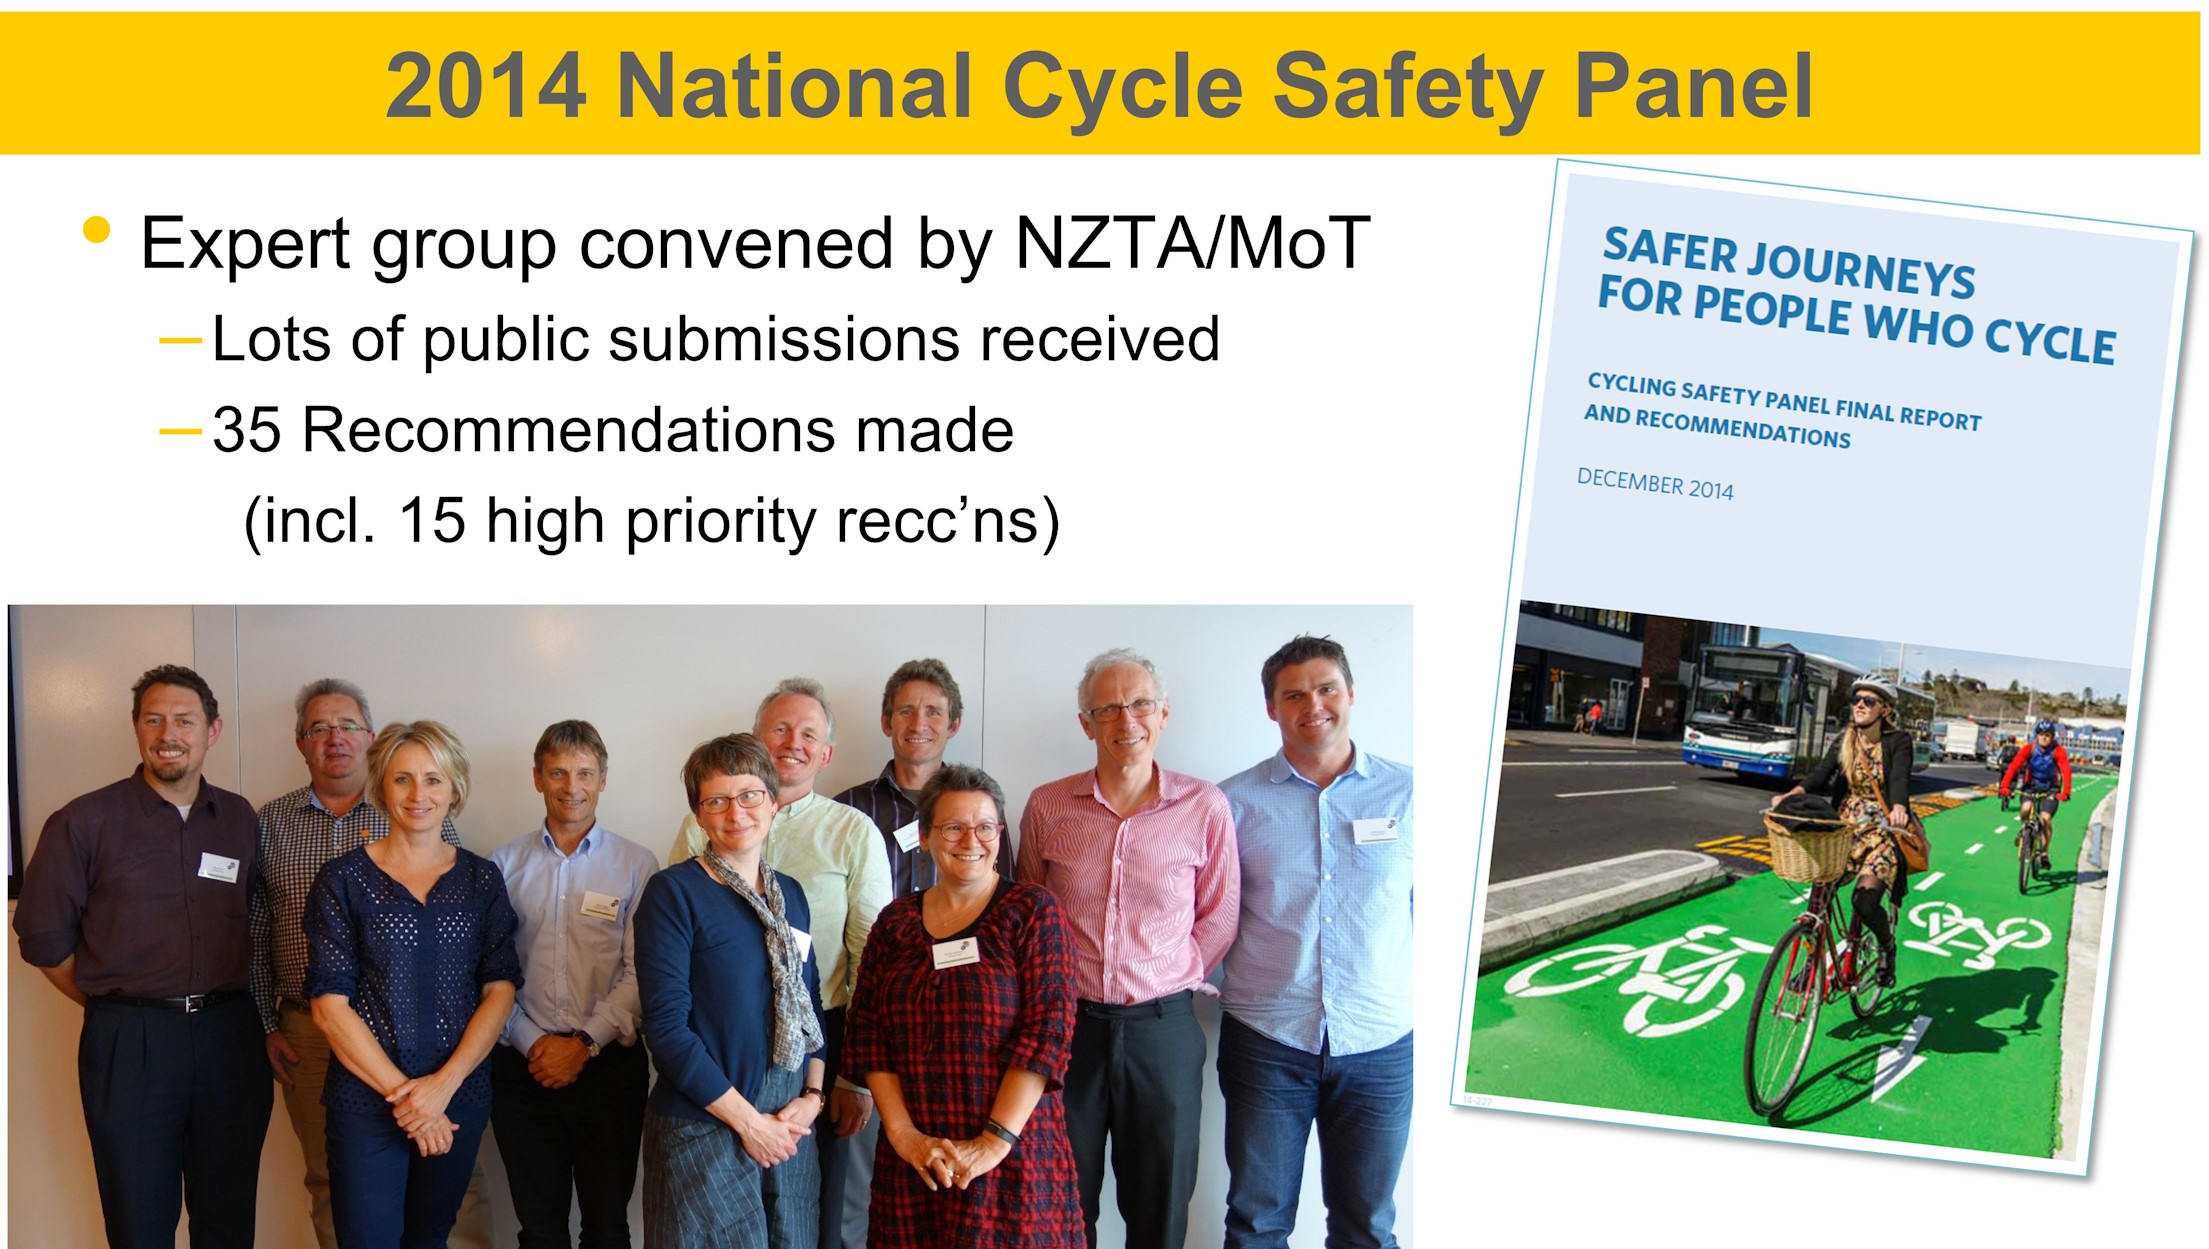 The 2014 NZ Cyclng Safety Panel